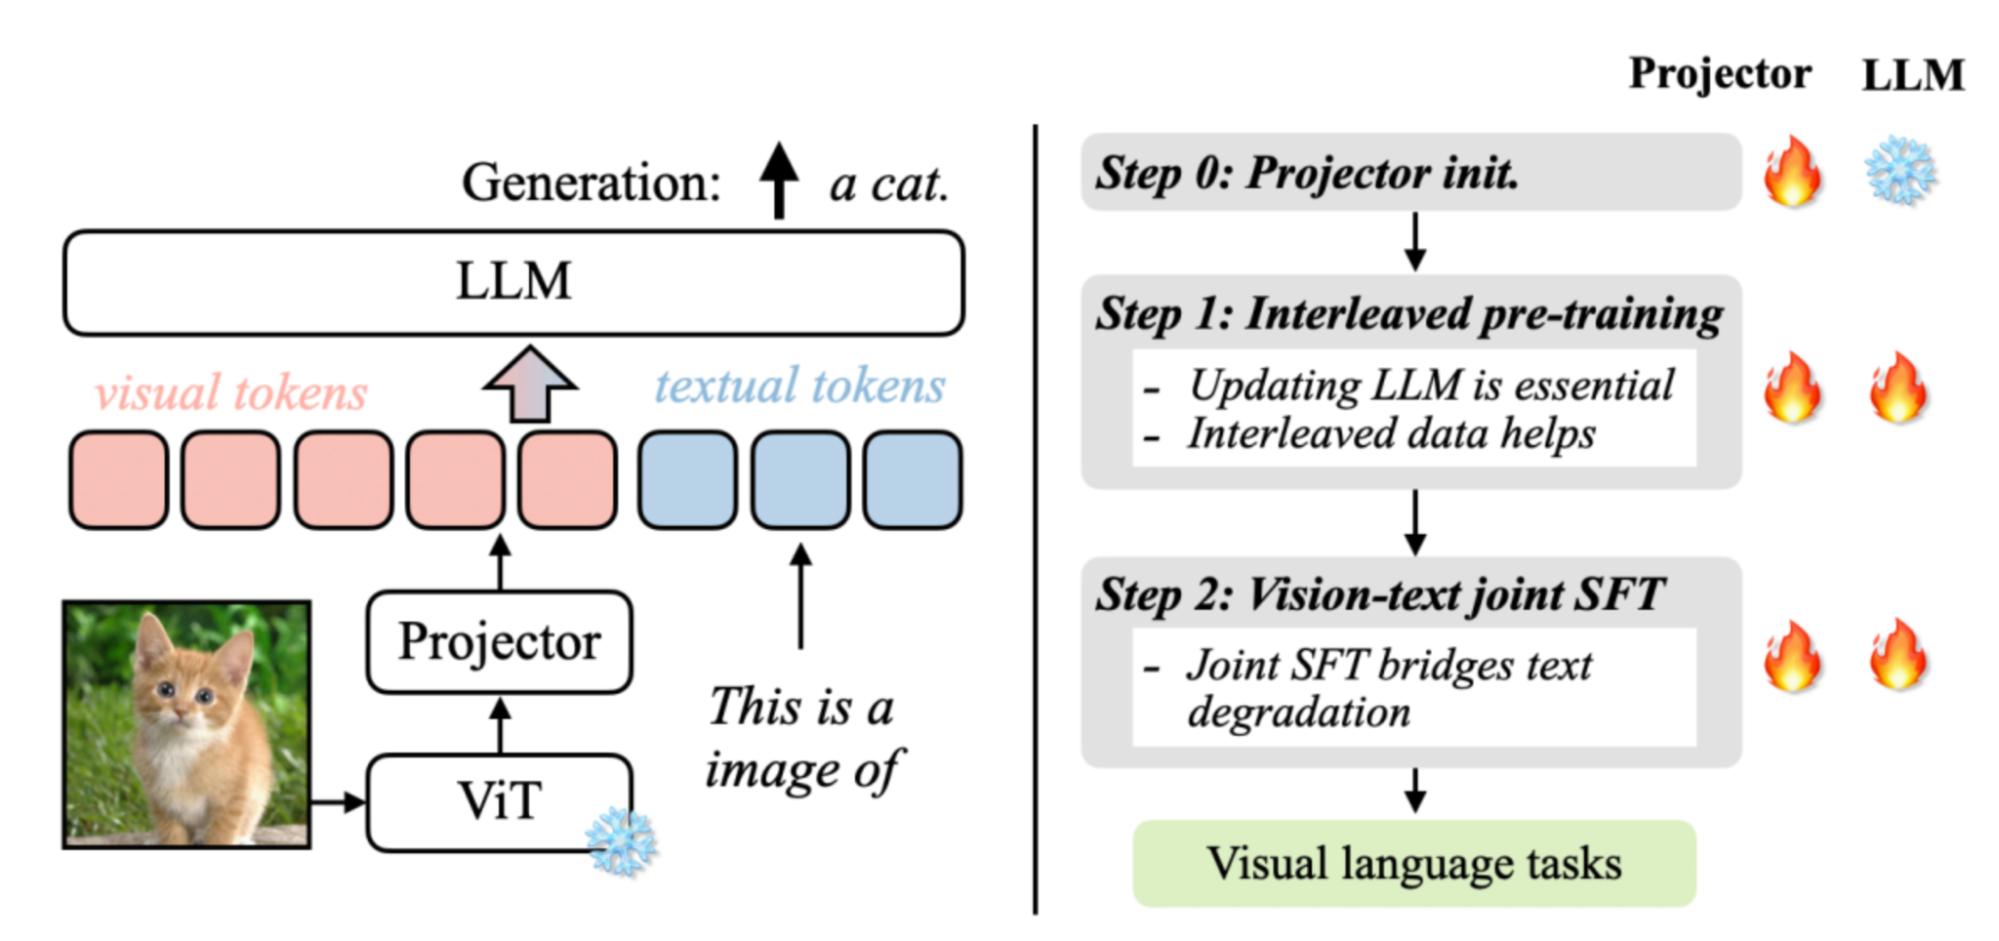 Diagram shows a vision encoder, projector, and LLM. The training recipe contains three stages: train the projector, do interleaved pre-training, and vision-text joint SFT.